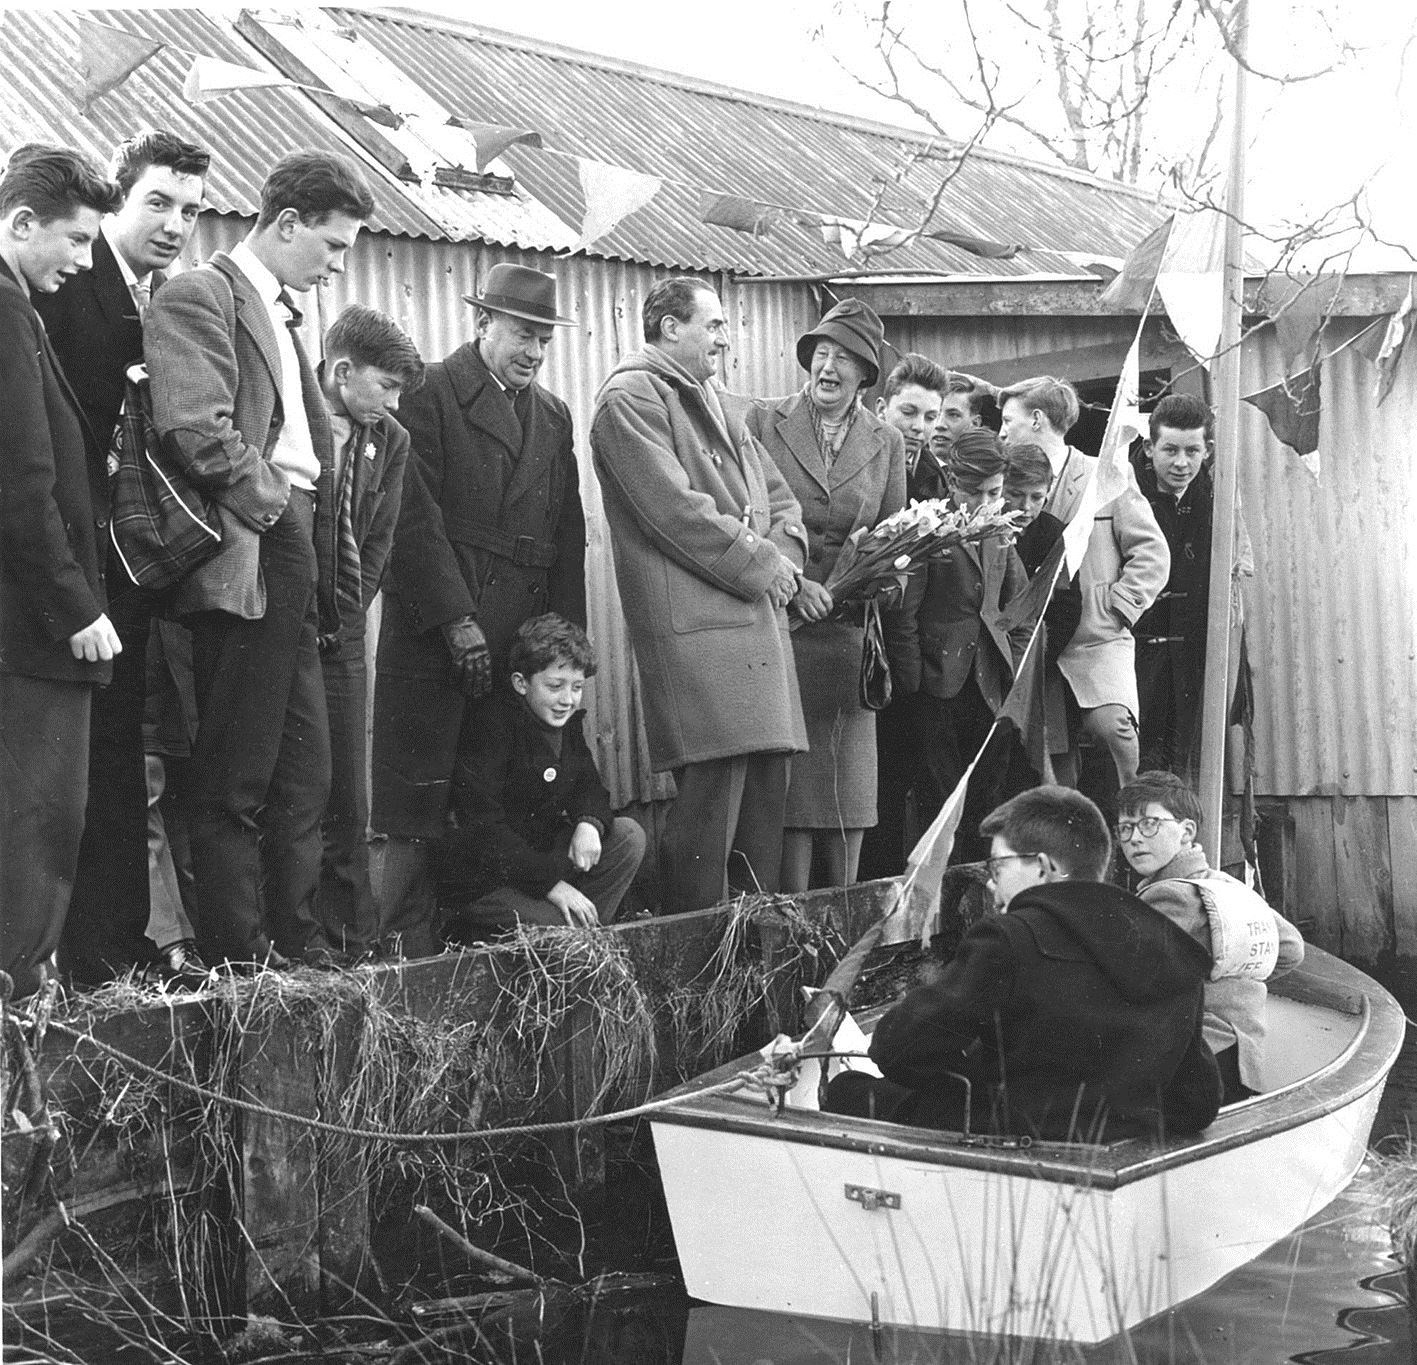 Onlookers having good fun at the launch of the Mallard, the product of the boat-building class, with Lady Maud Baillie doing the honours.